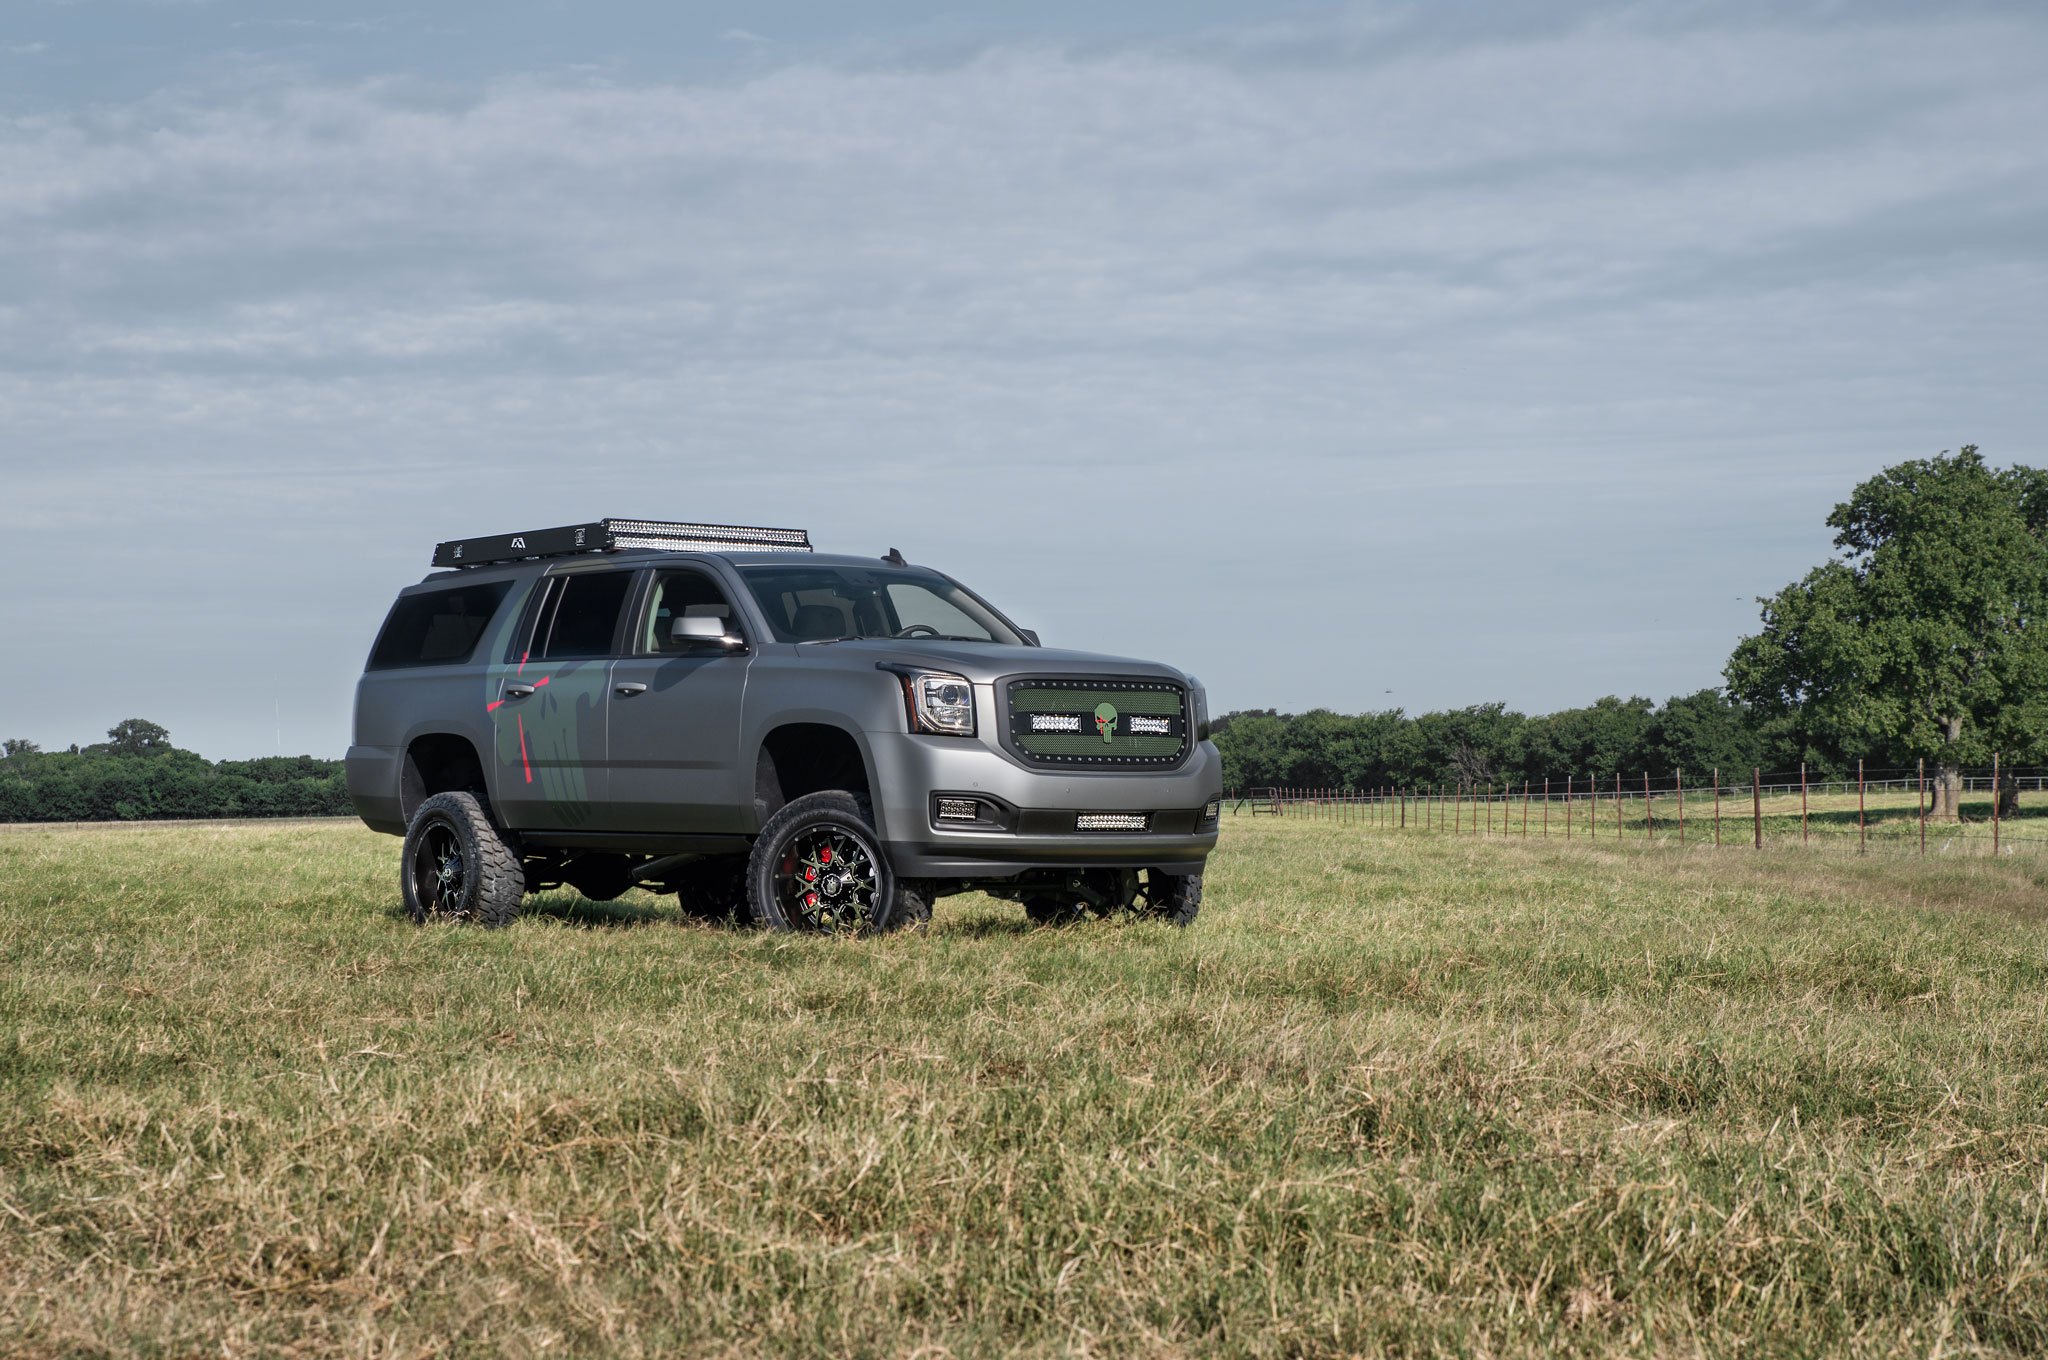 Gmc Yukon XL on 35 inch Tires - Photo by Complete Customs